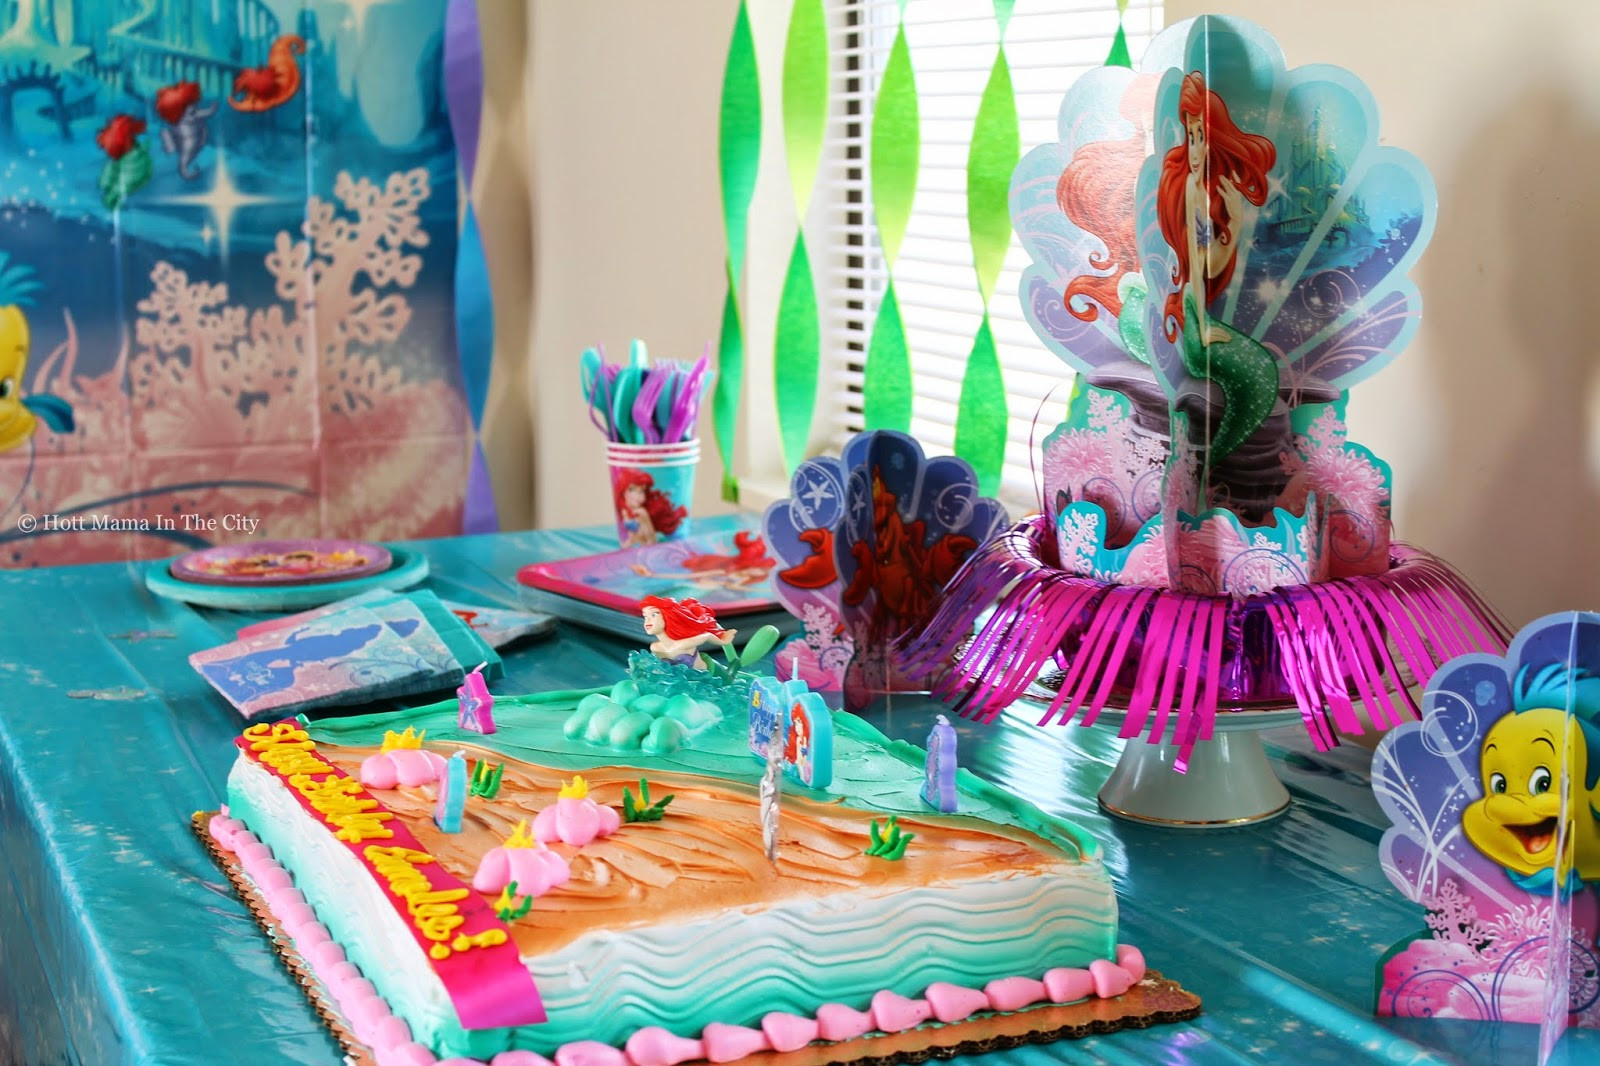 Ariel Little Mermaid Party Ideas
 Hot Mama In The City Under the Sea with The Little